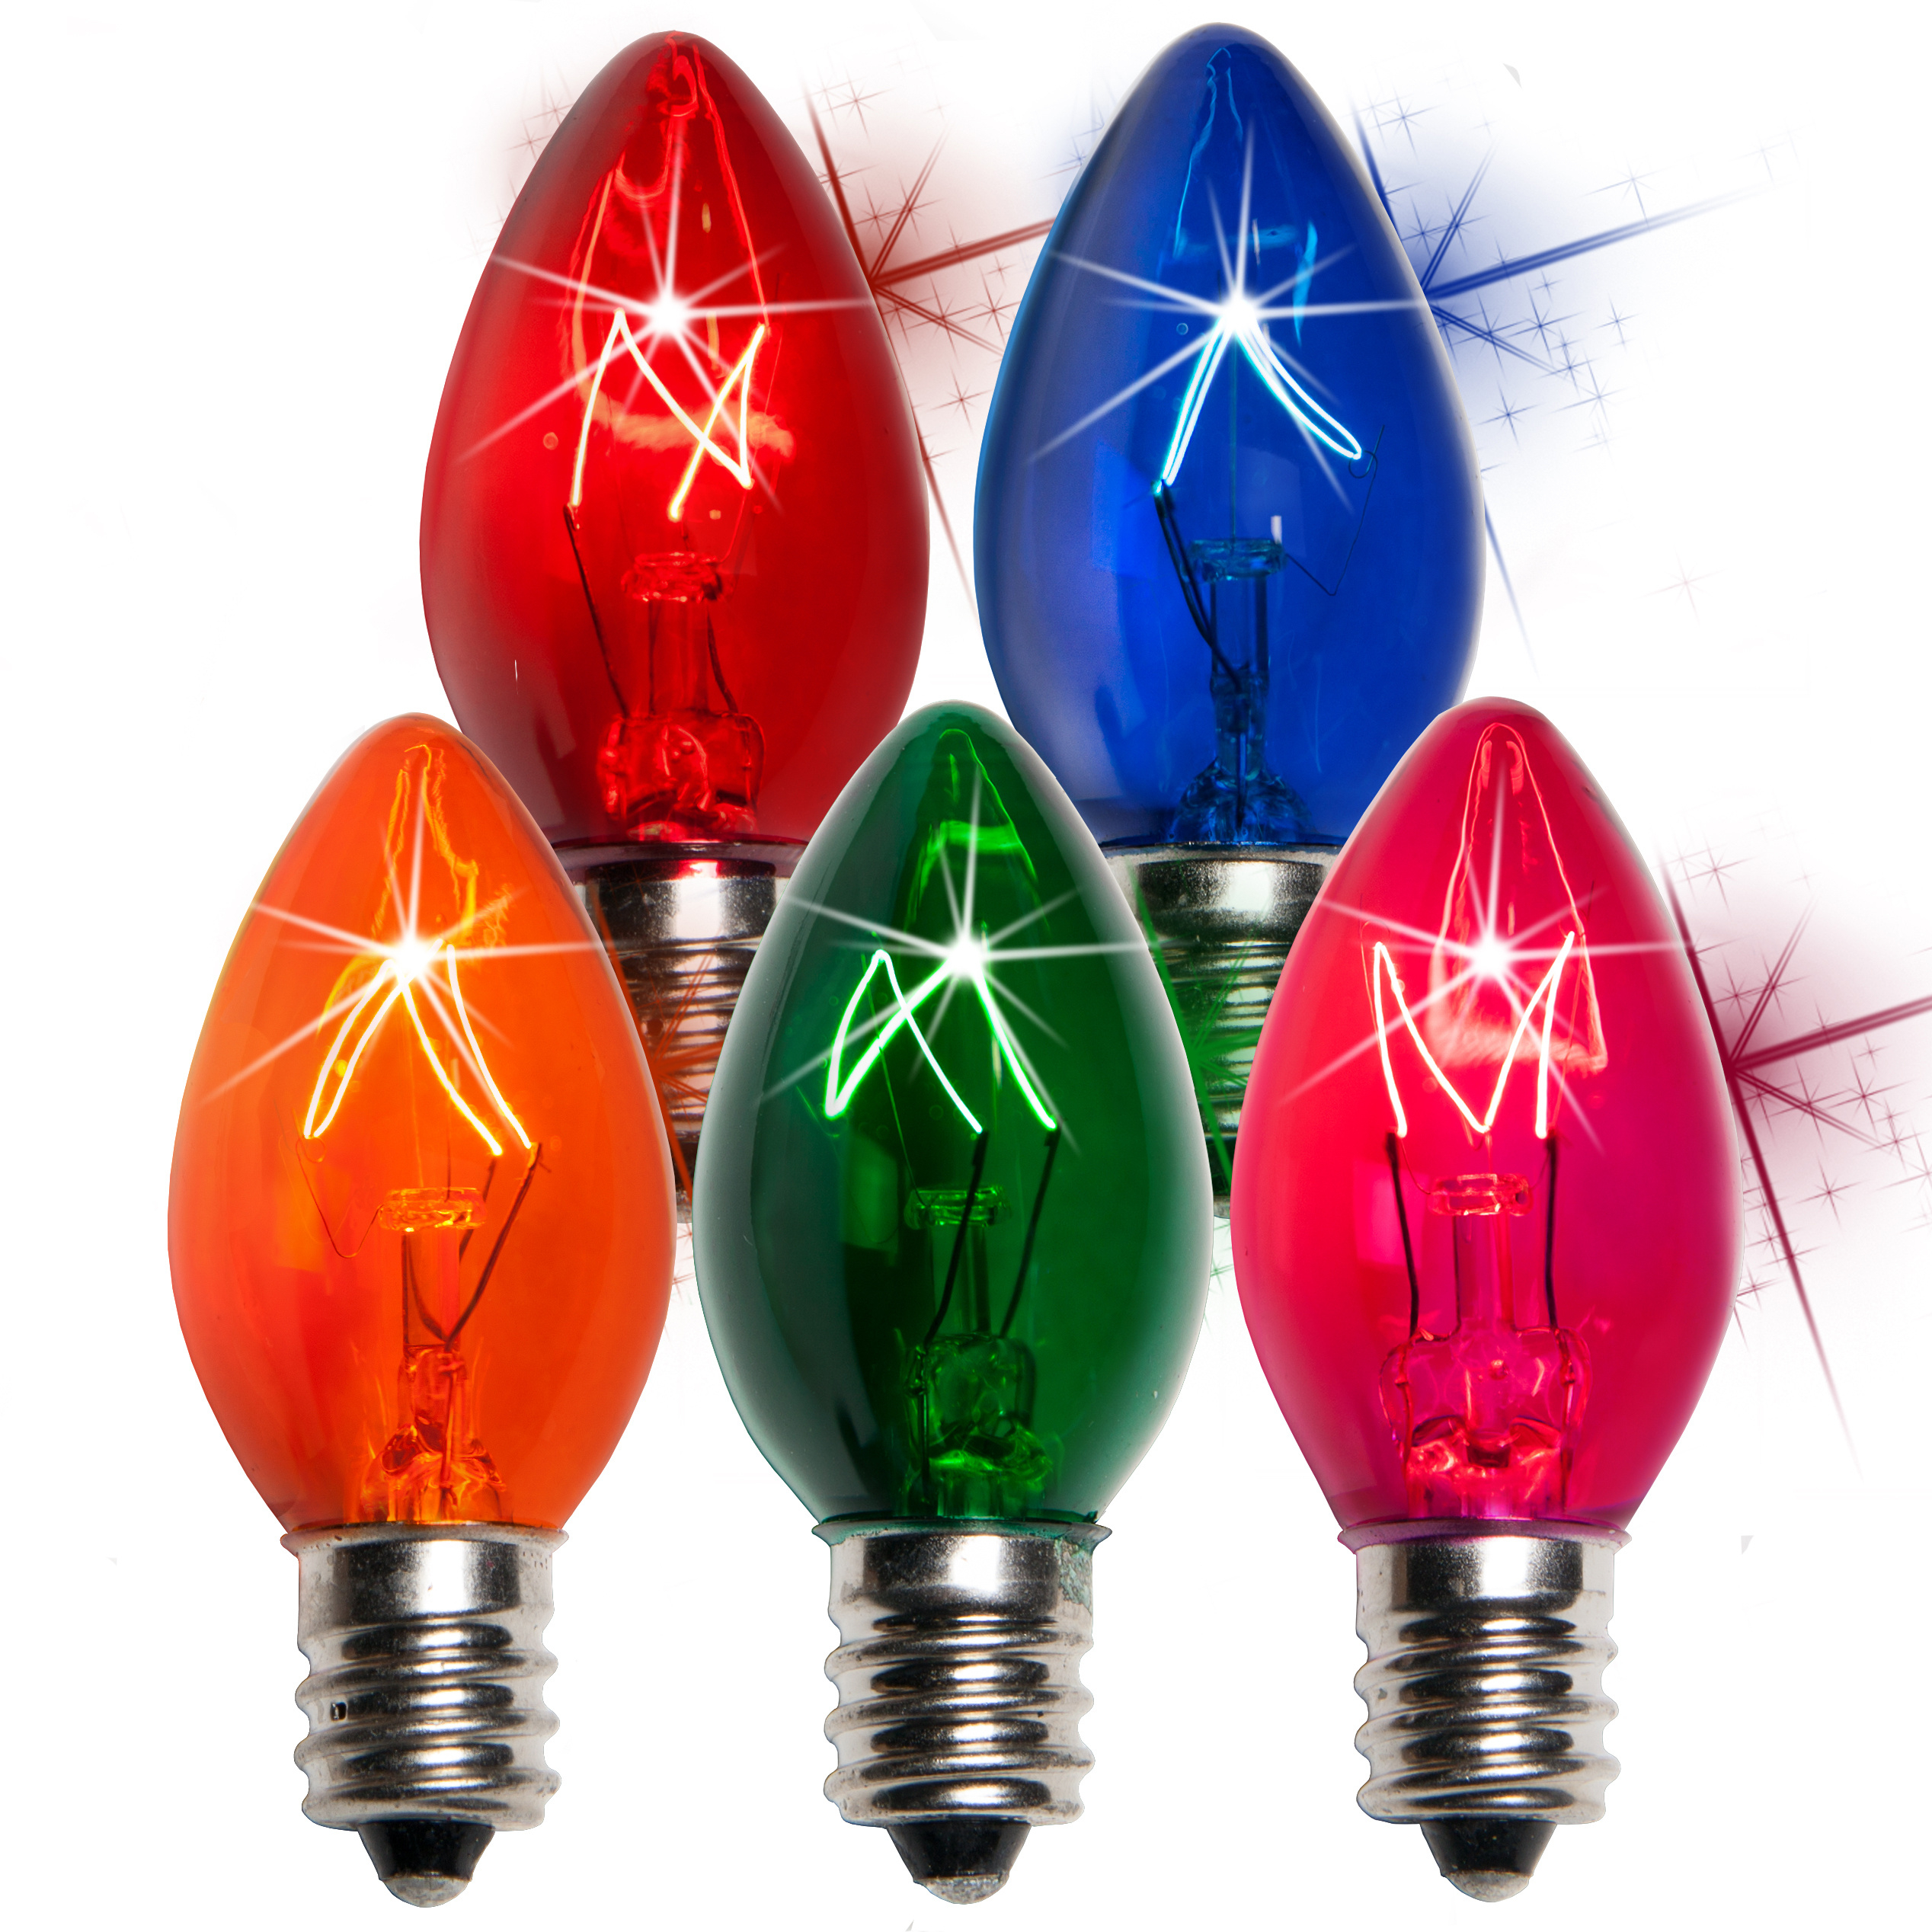 C7 Christmas Light Bulb C7 Twinkle Multicolor Christmas Light throughout sizing 2536 X 2536